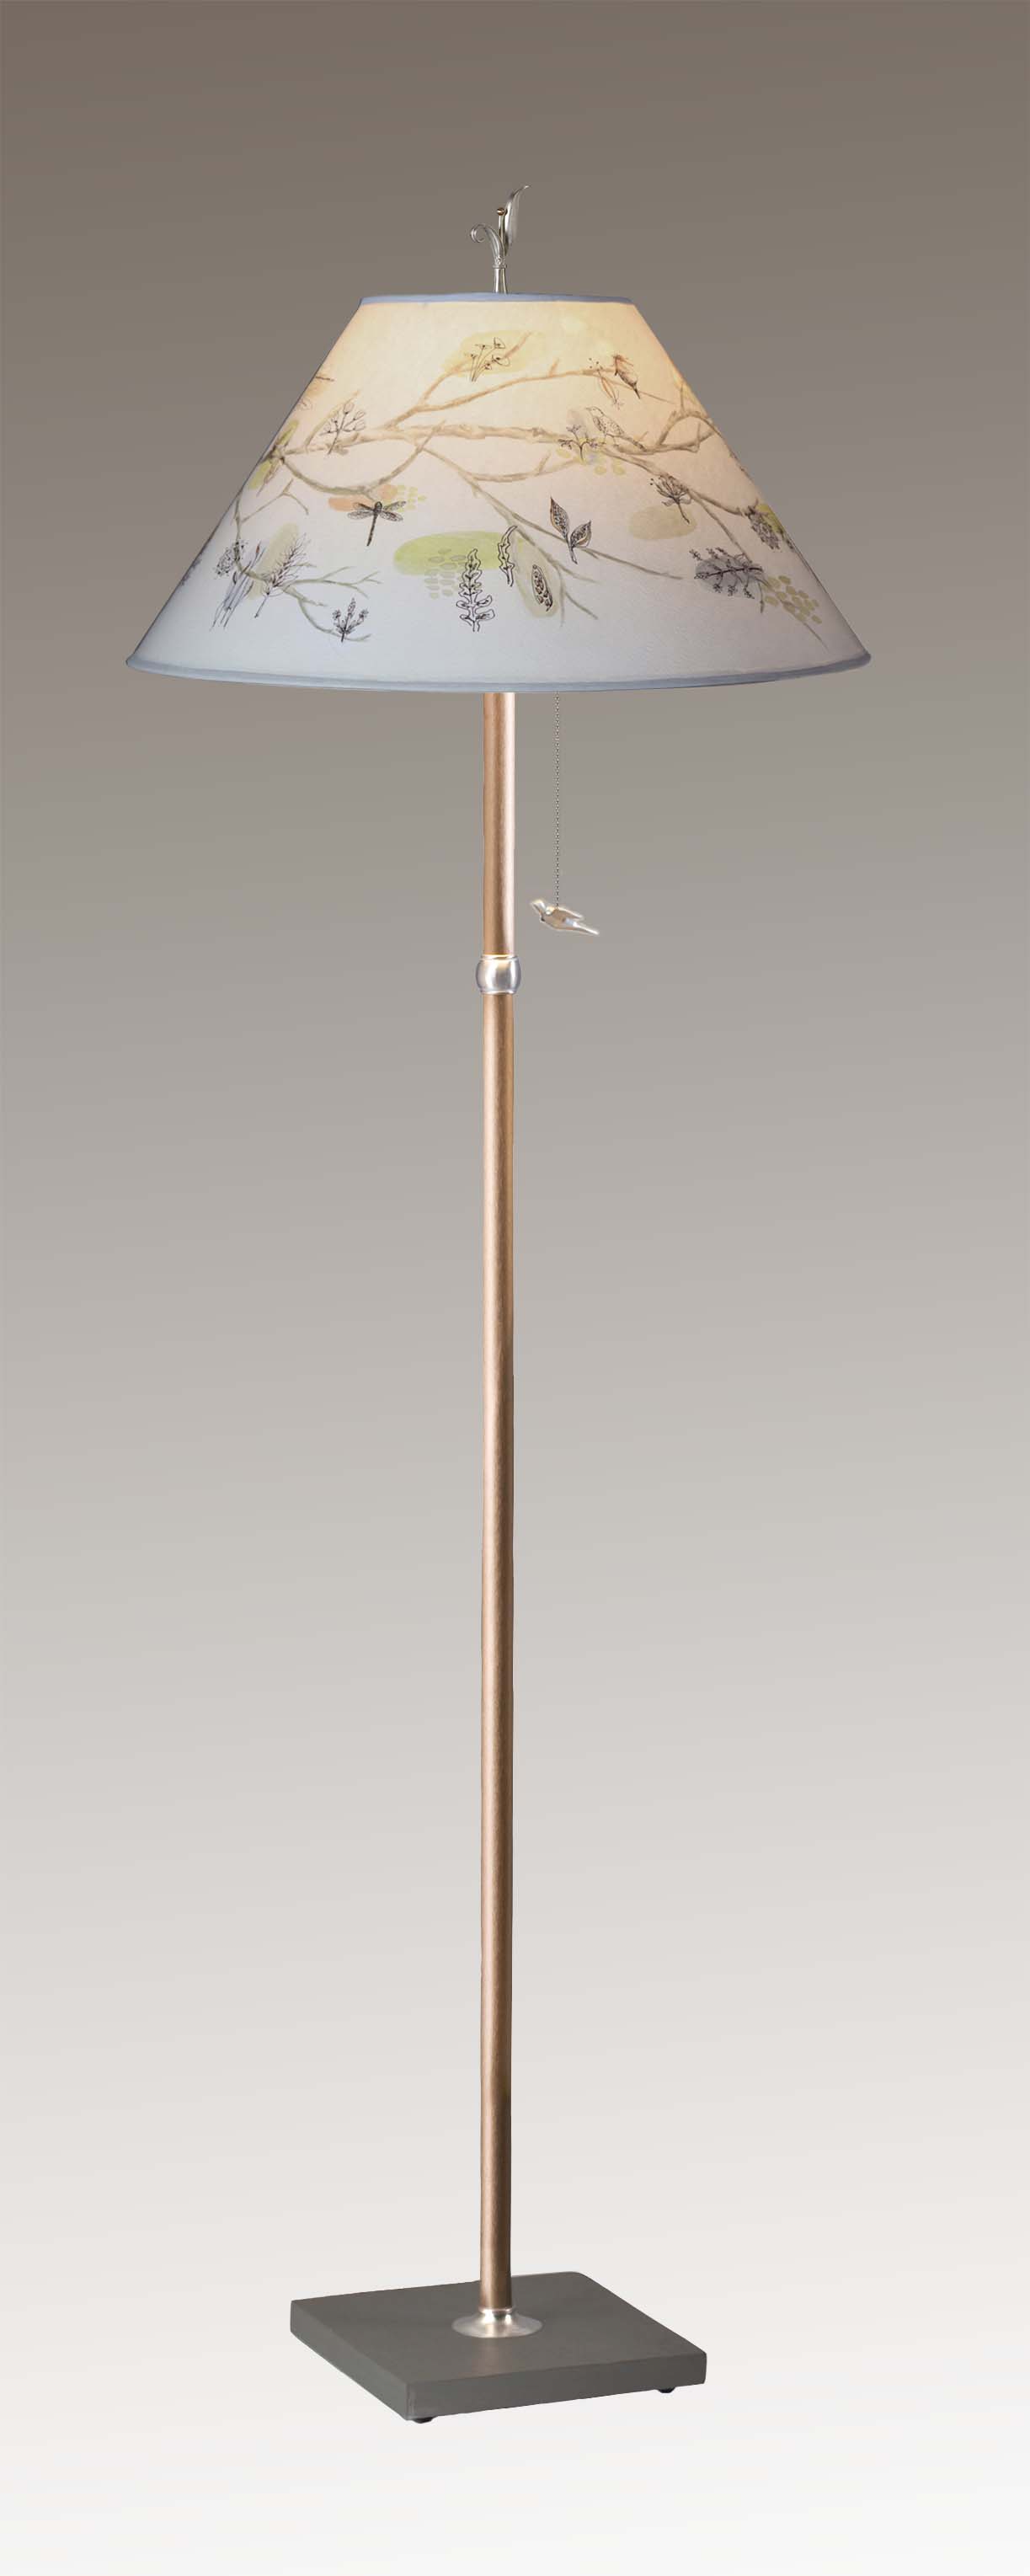 Janna Ugone & Co Floor Lamps Copper Floor Lamp with Large Conical Shade in Artful Branch